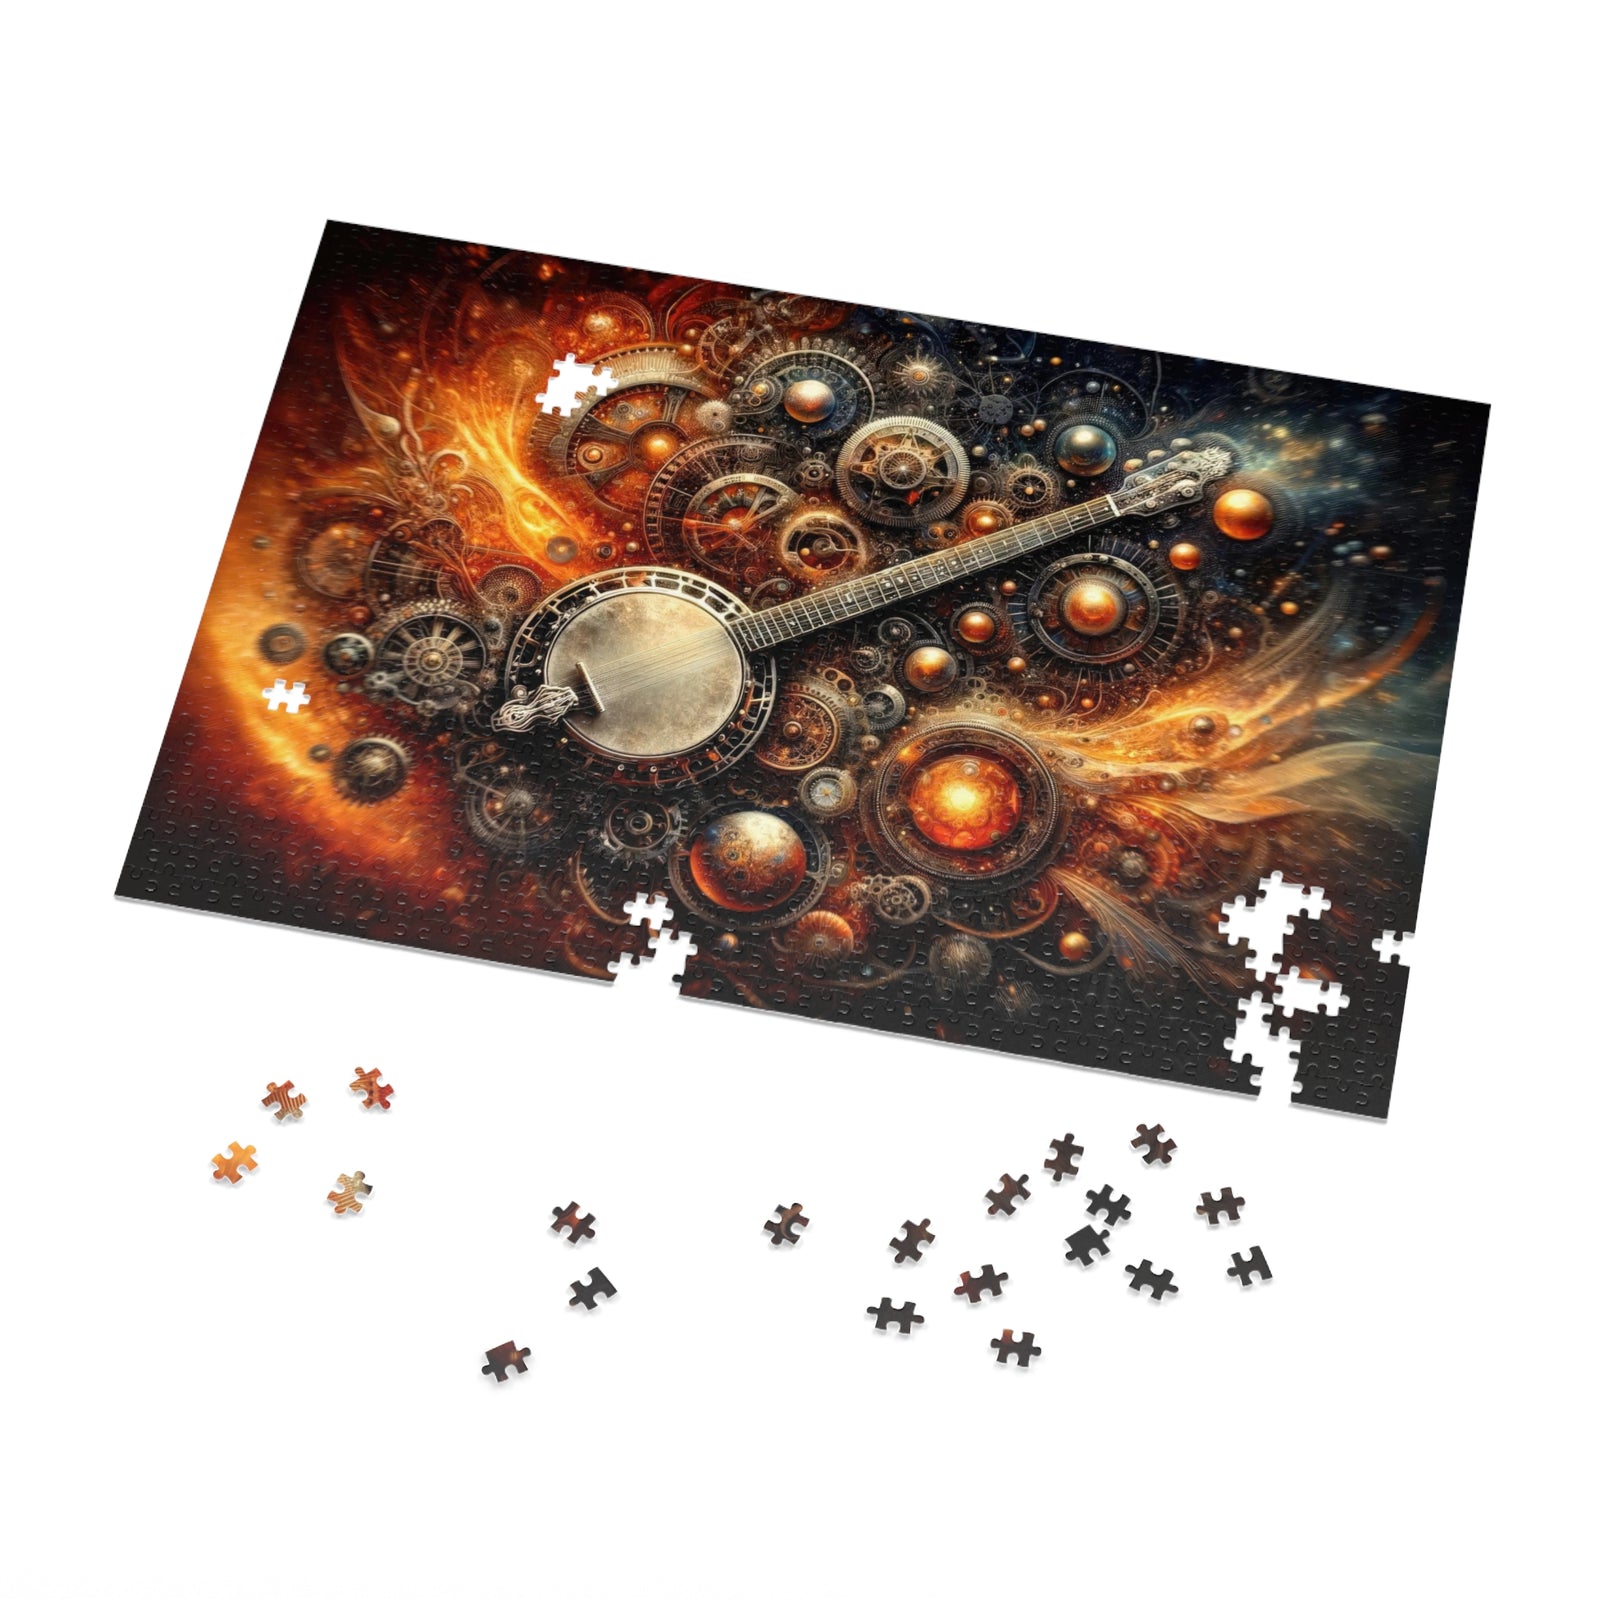 An Elegy of Cogs and Chords Jigsaw Puzzle